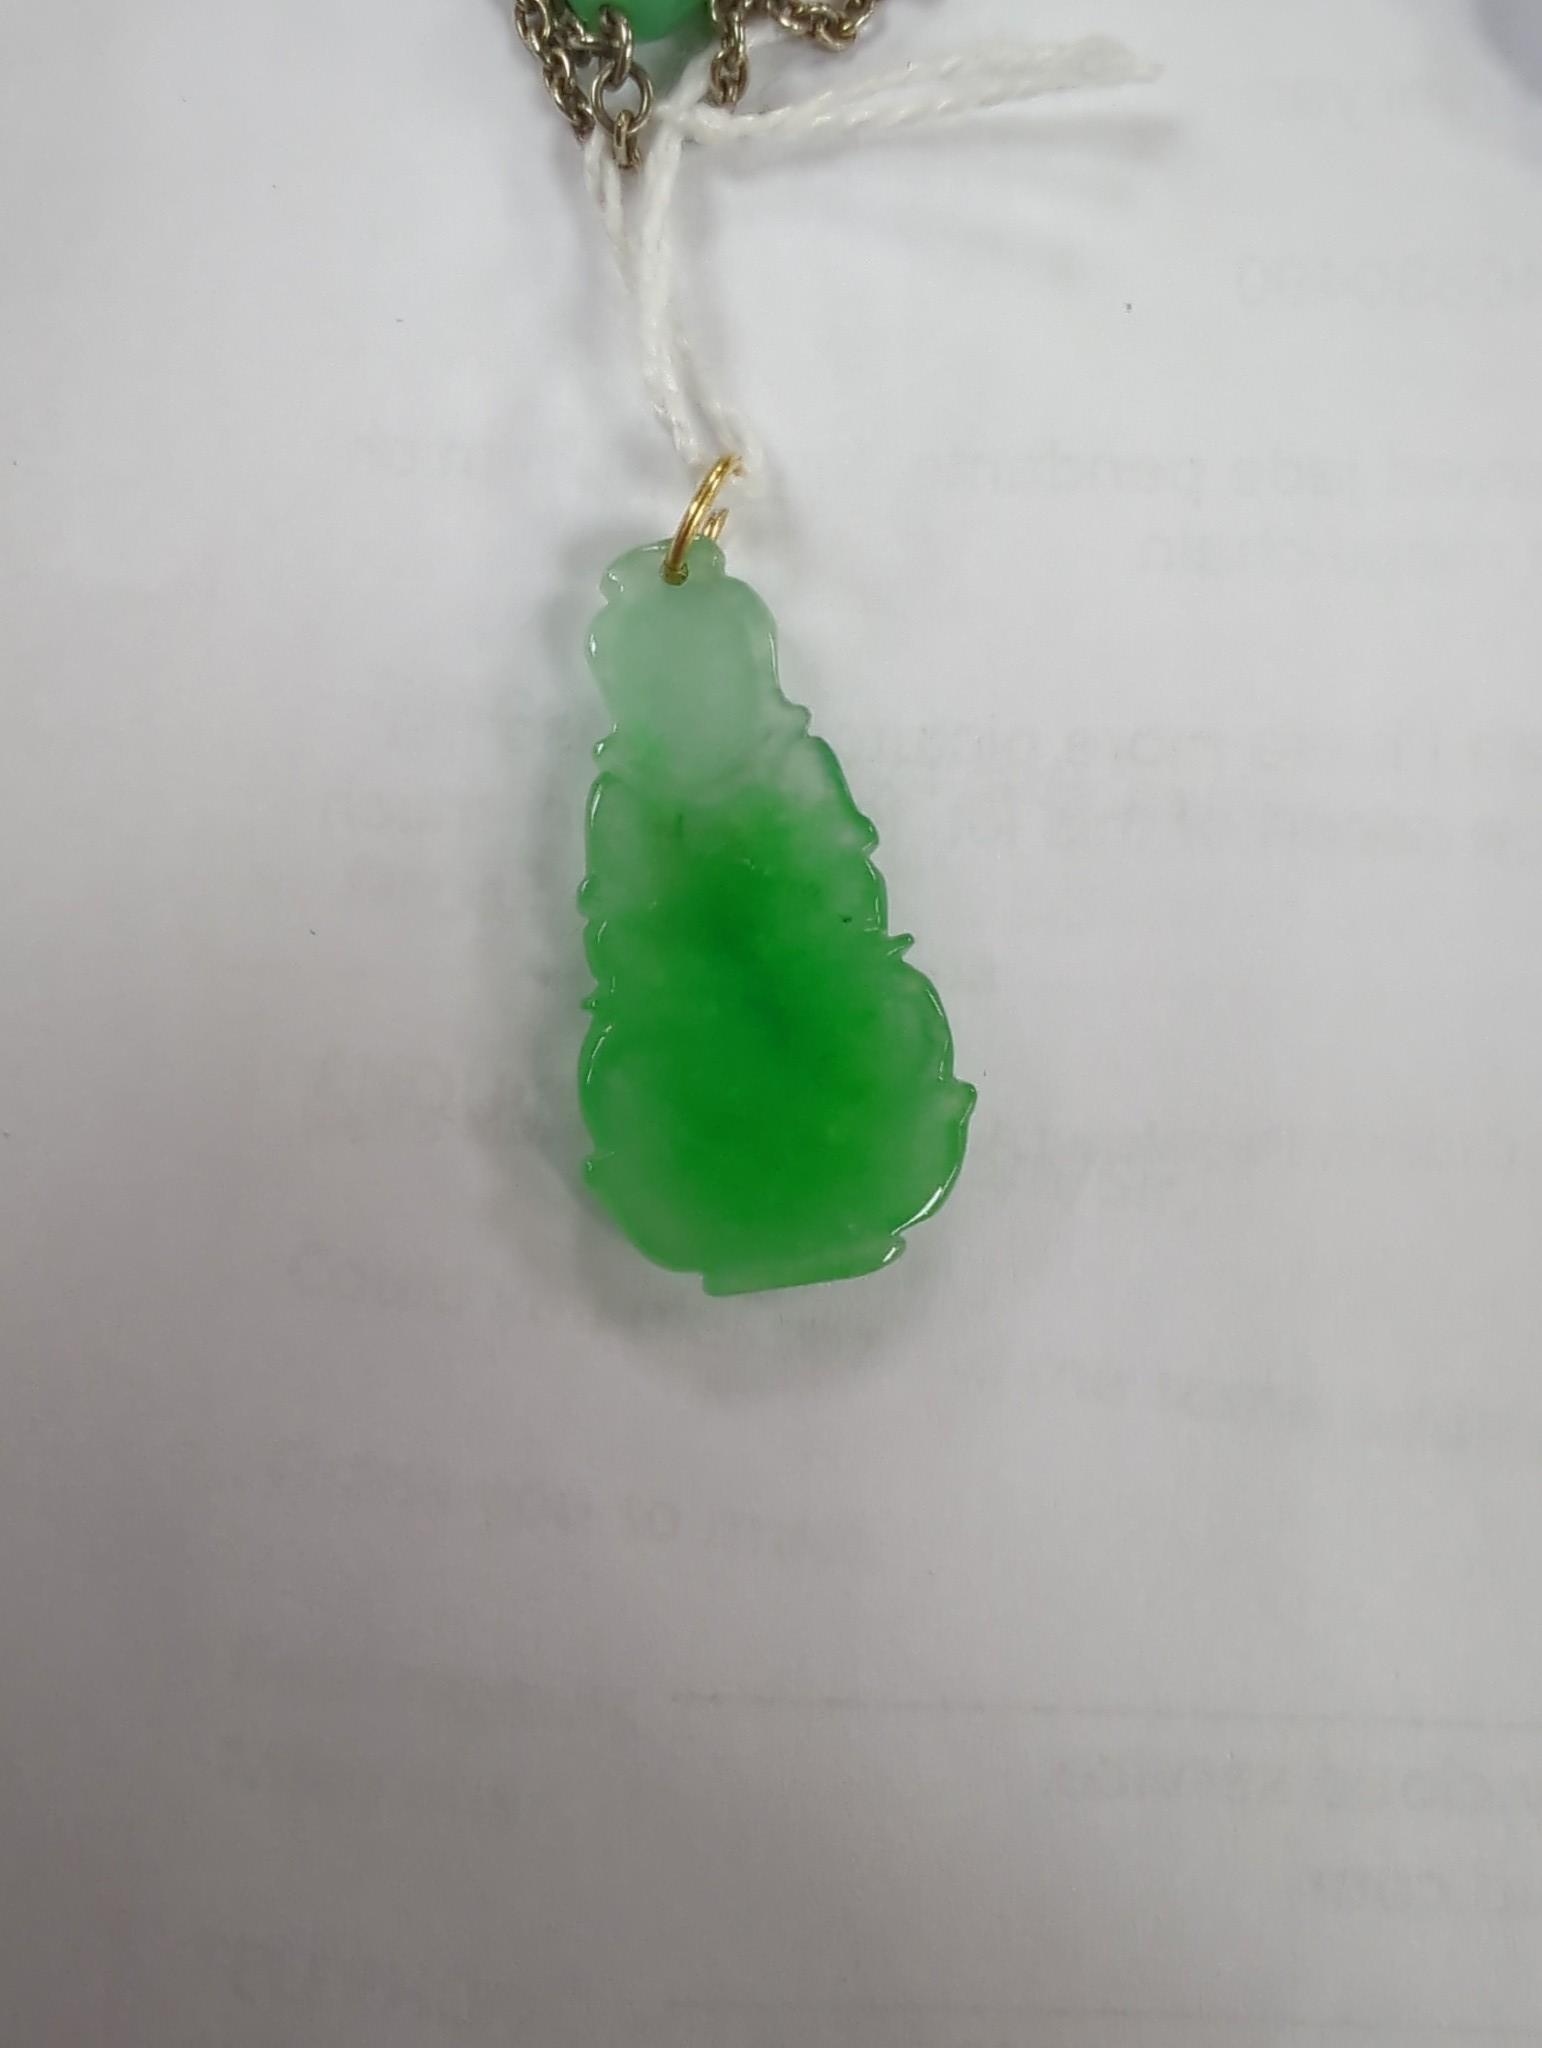 Two carved jade pendants, largest 47mm on a white metal chain.